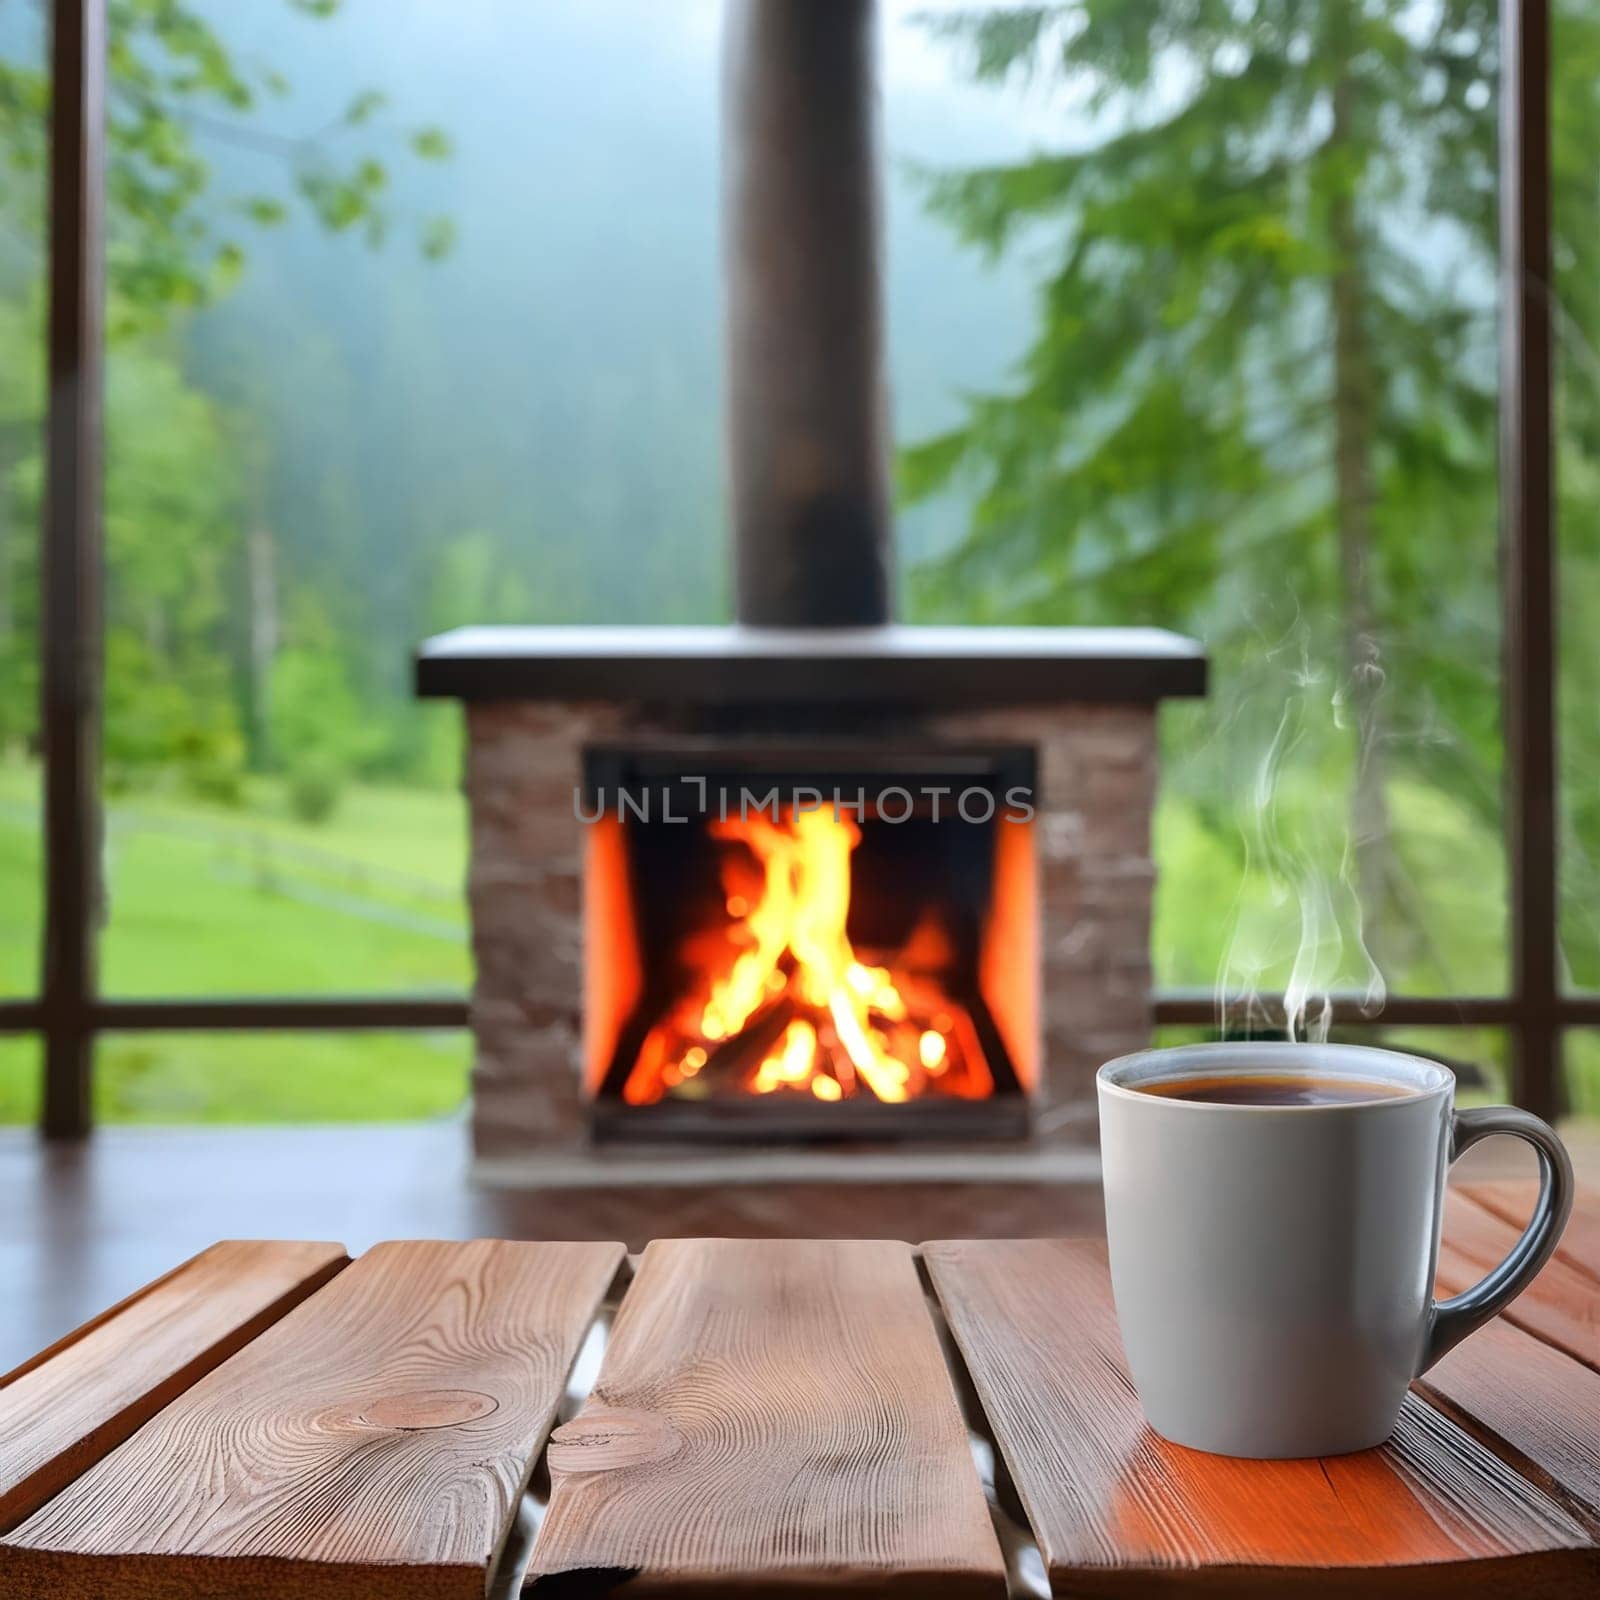 Wood is burning in the cottage fireplace. Wild forested mountains outside the window. A cup stands on a wooden table. Steam rises from a hot drink. AI generated